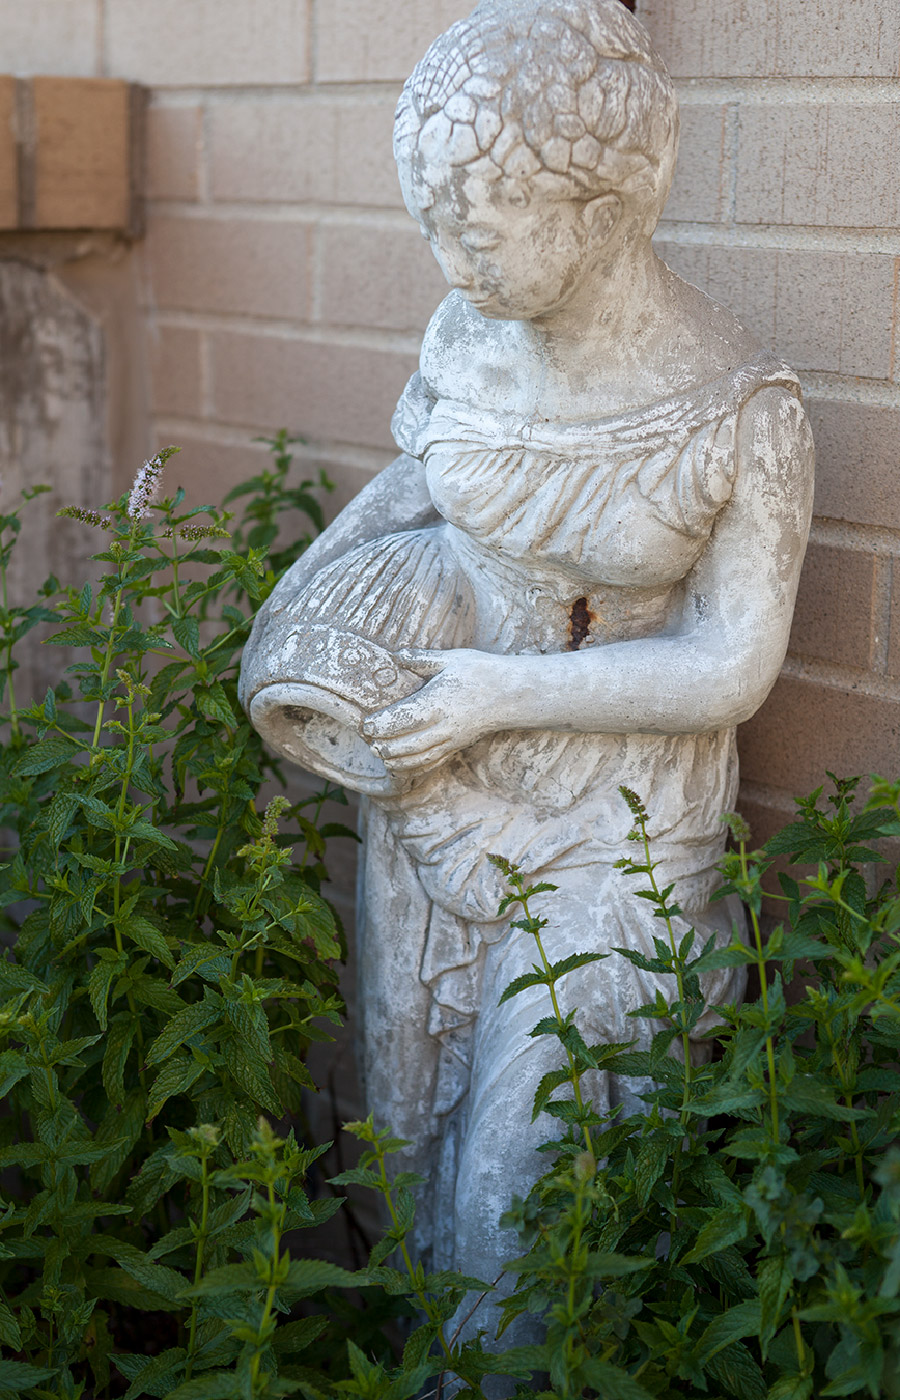 Sculpture of a lady holding a vase